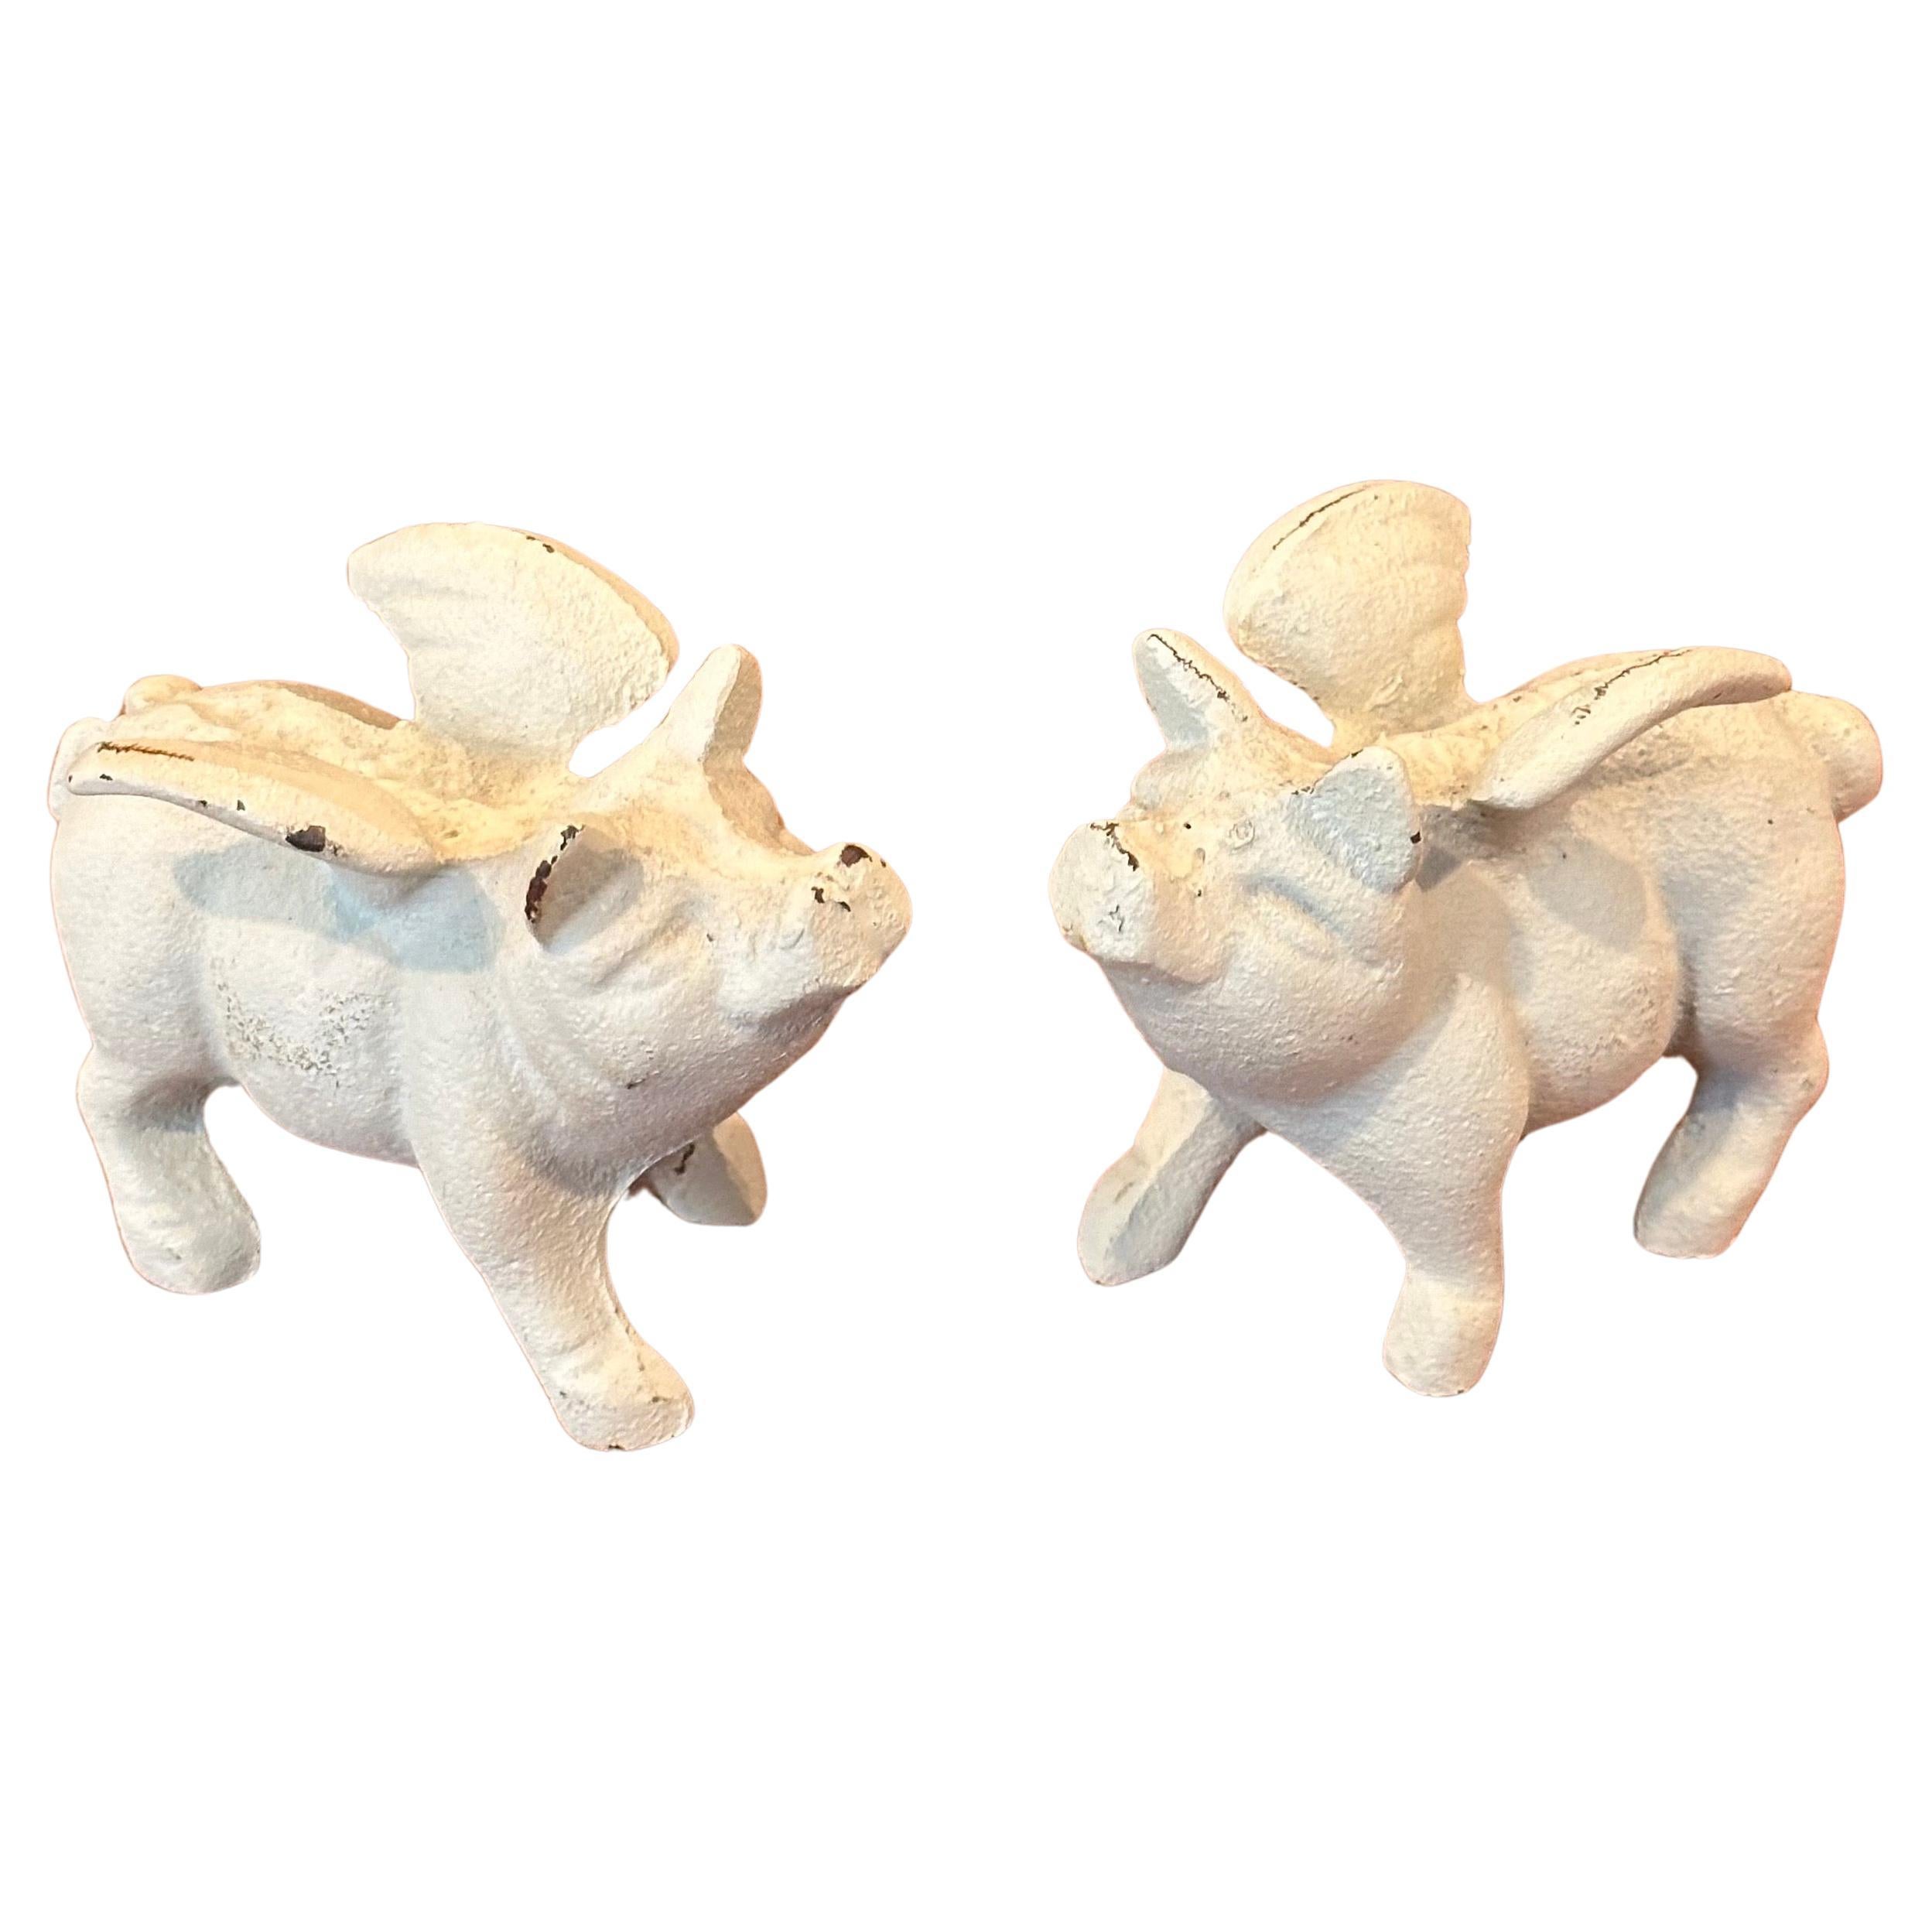 Pair of Small Cast Iron "When Pigs Fly" Paperweights / Sculptures